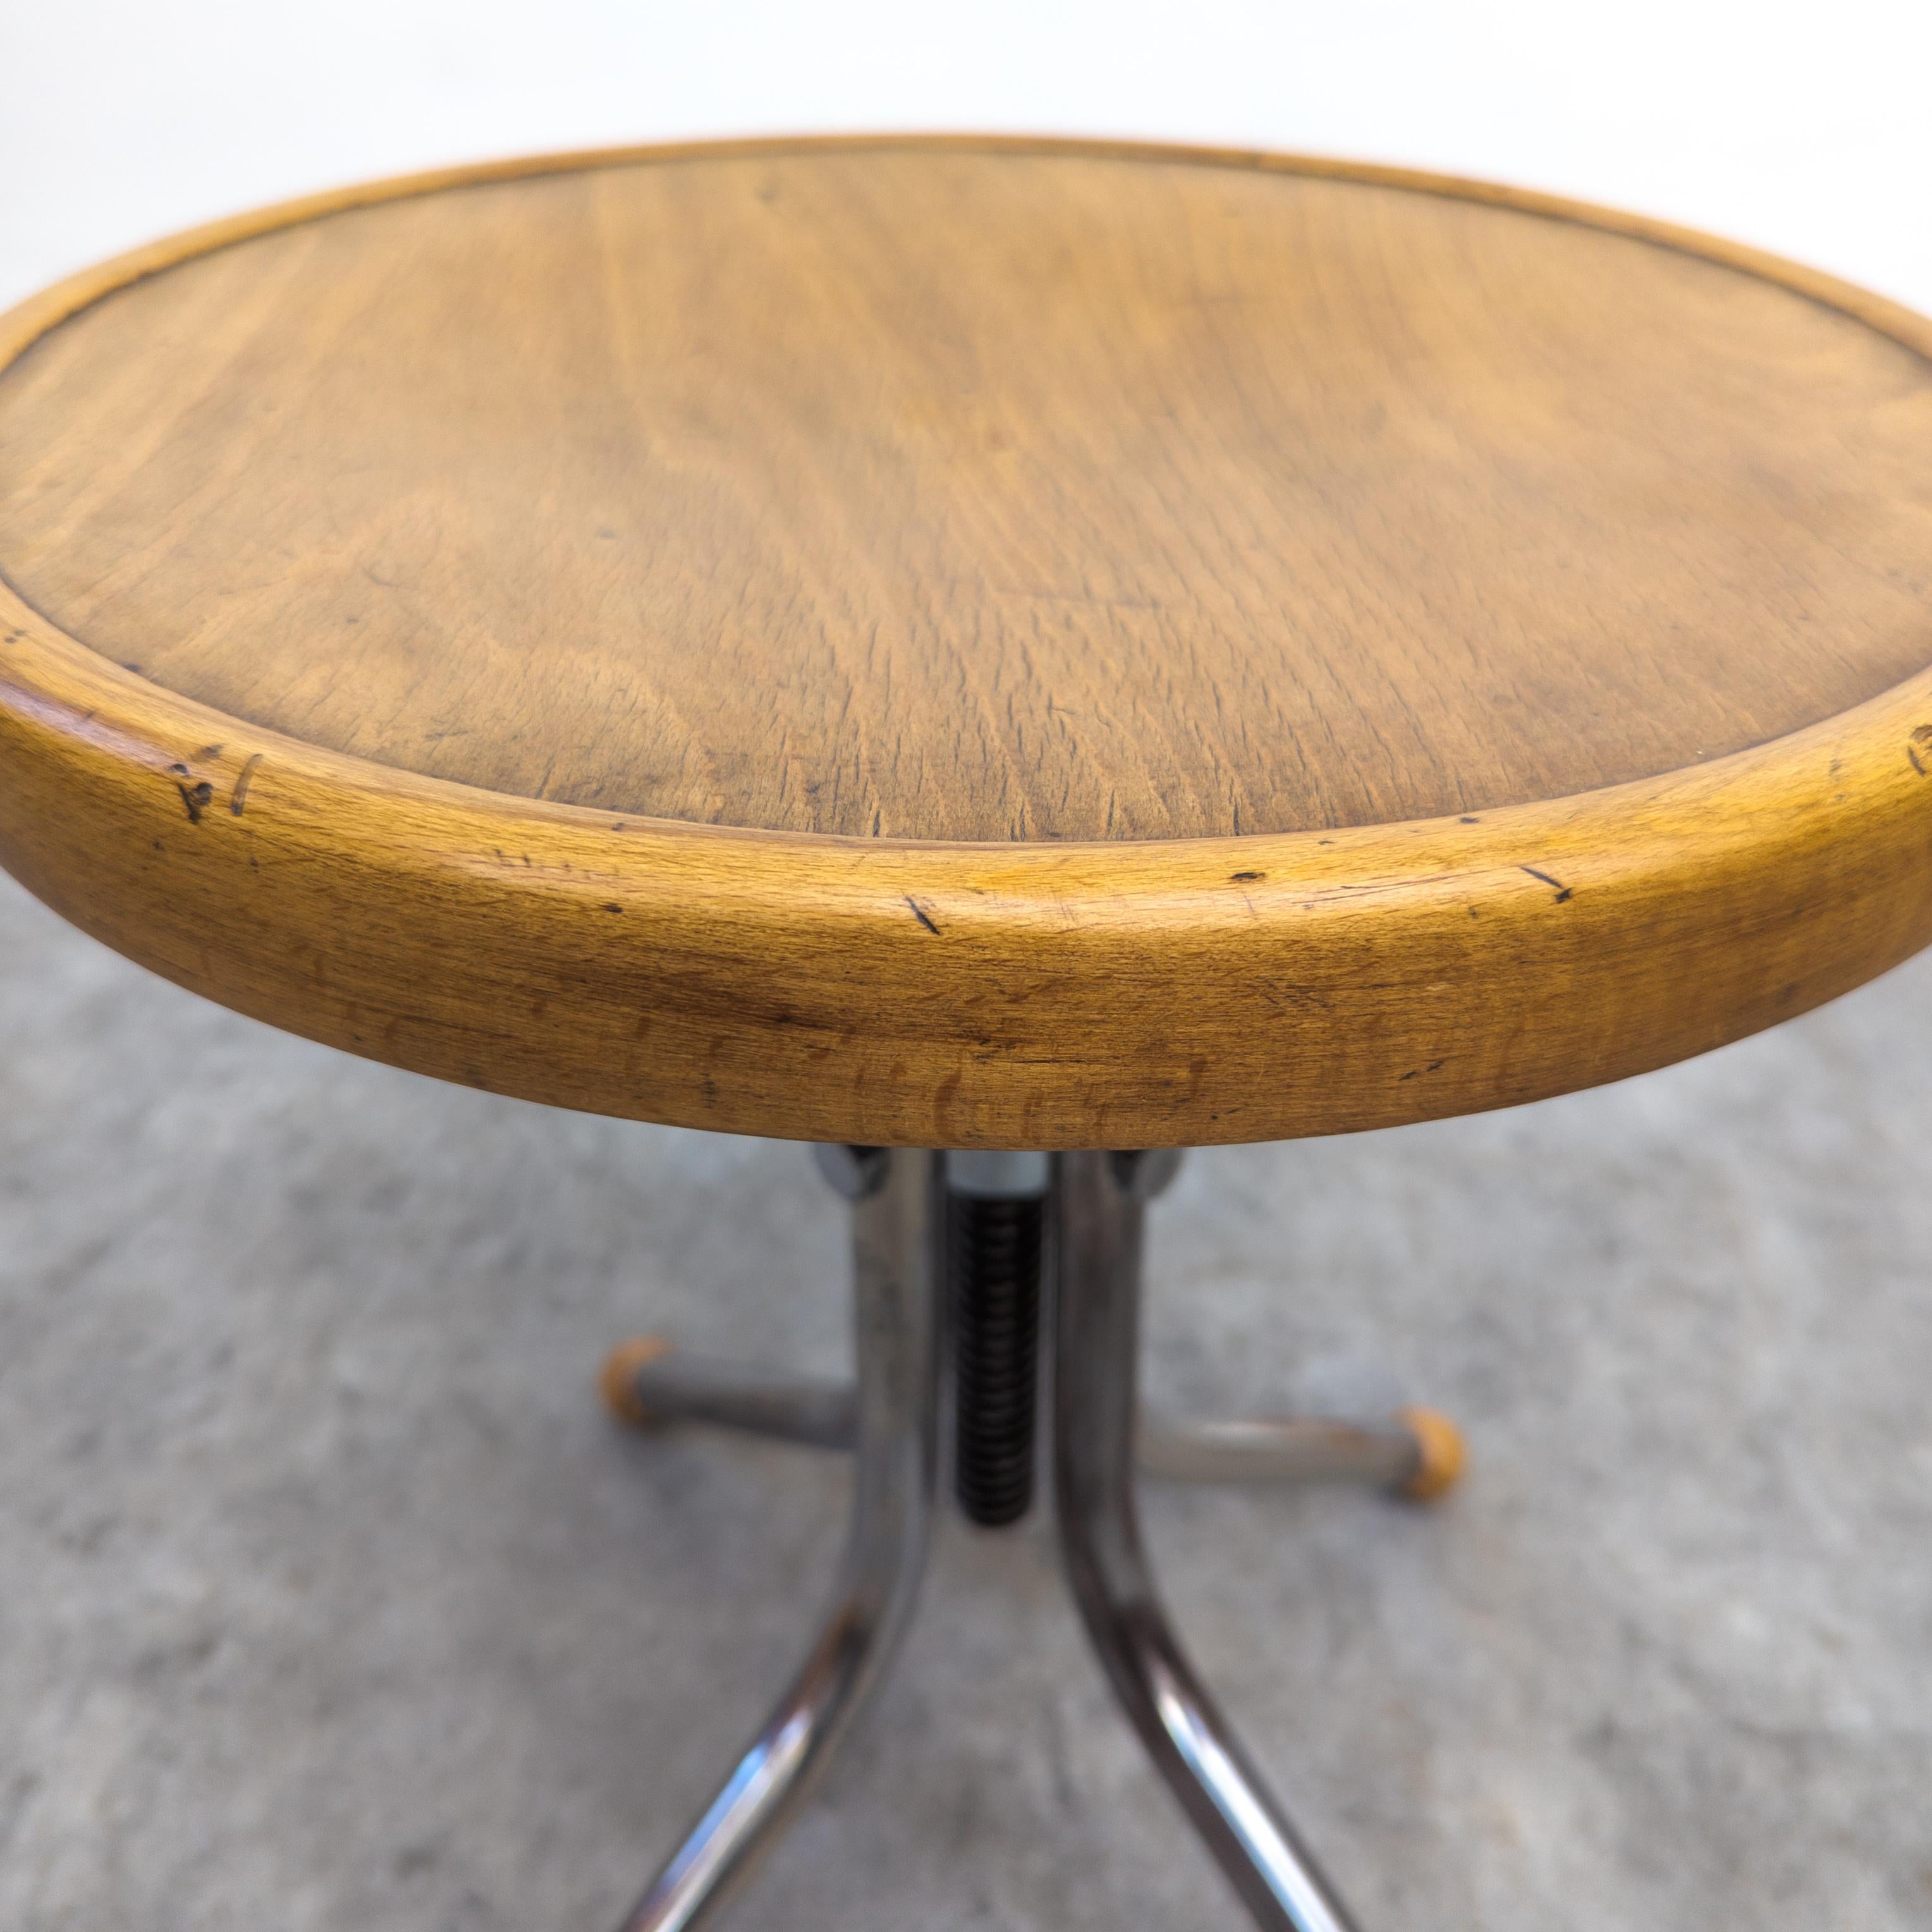 A rare variant of stool mod. no. B 195, designed by Marcel Breuer For Sale 2